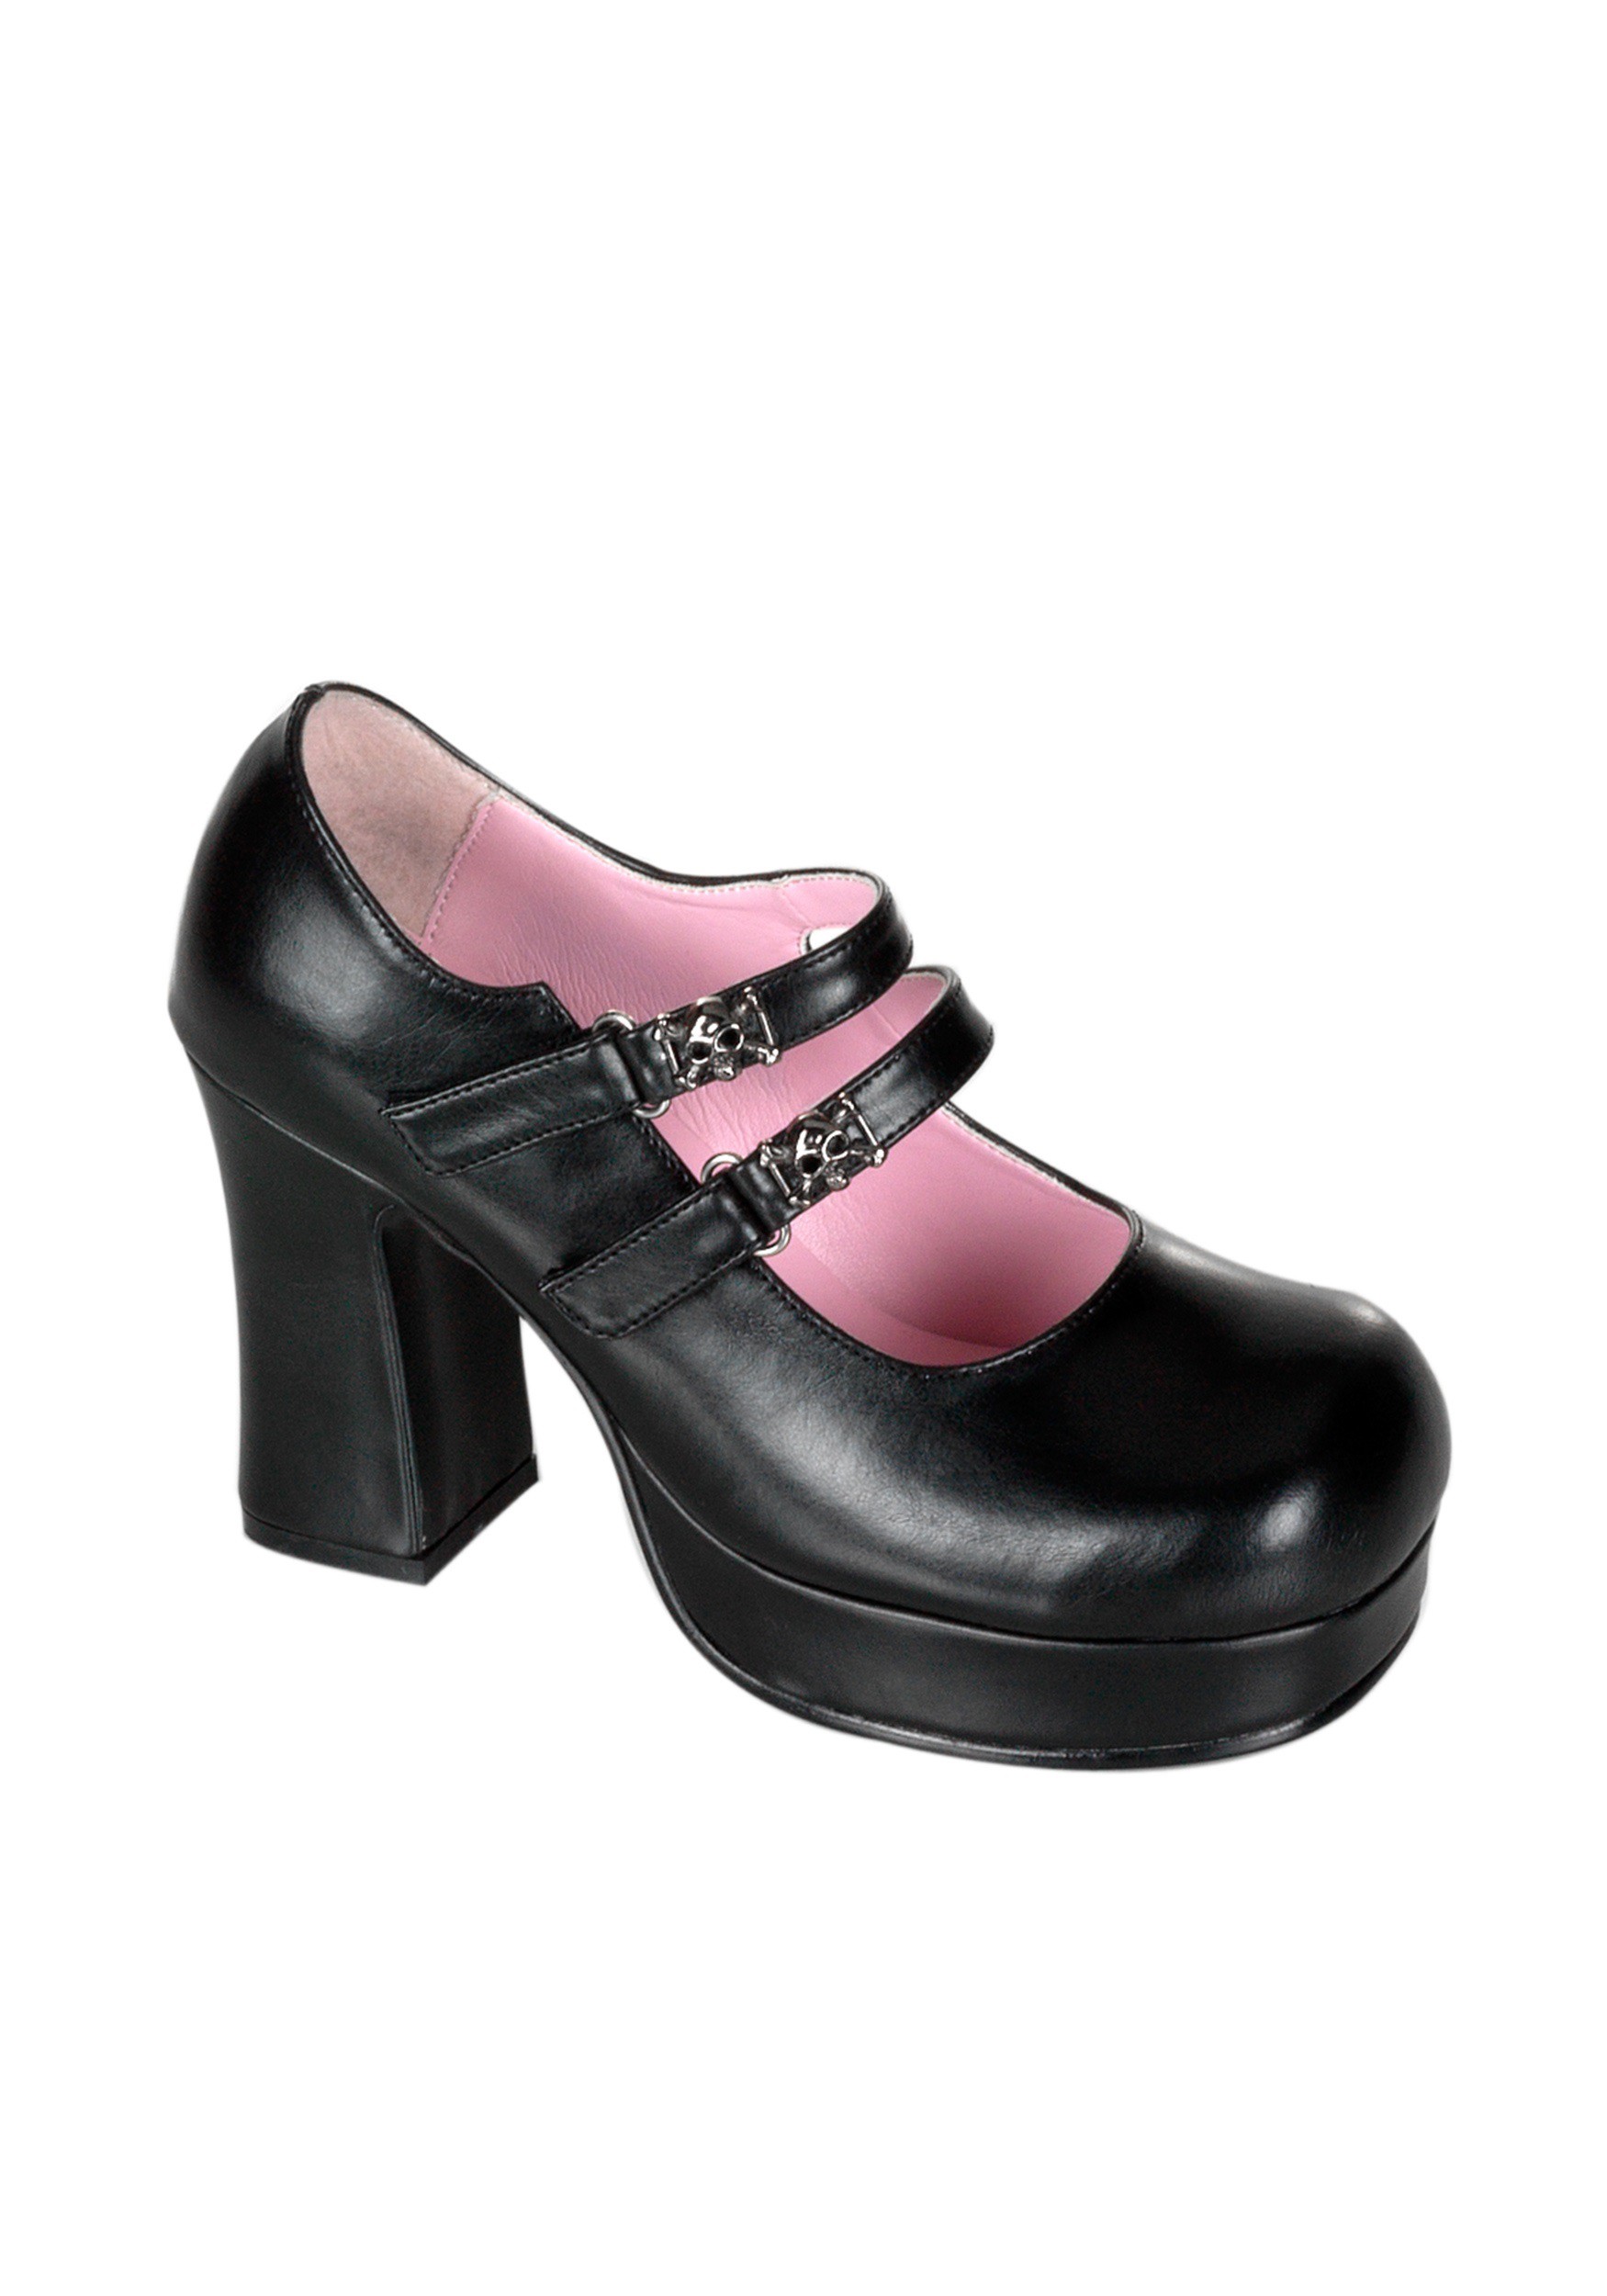 Classic Mary Jane Navy Shoes In Patent For a Toddle Girl 